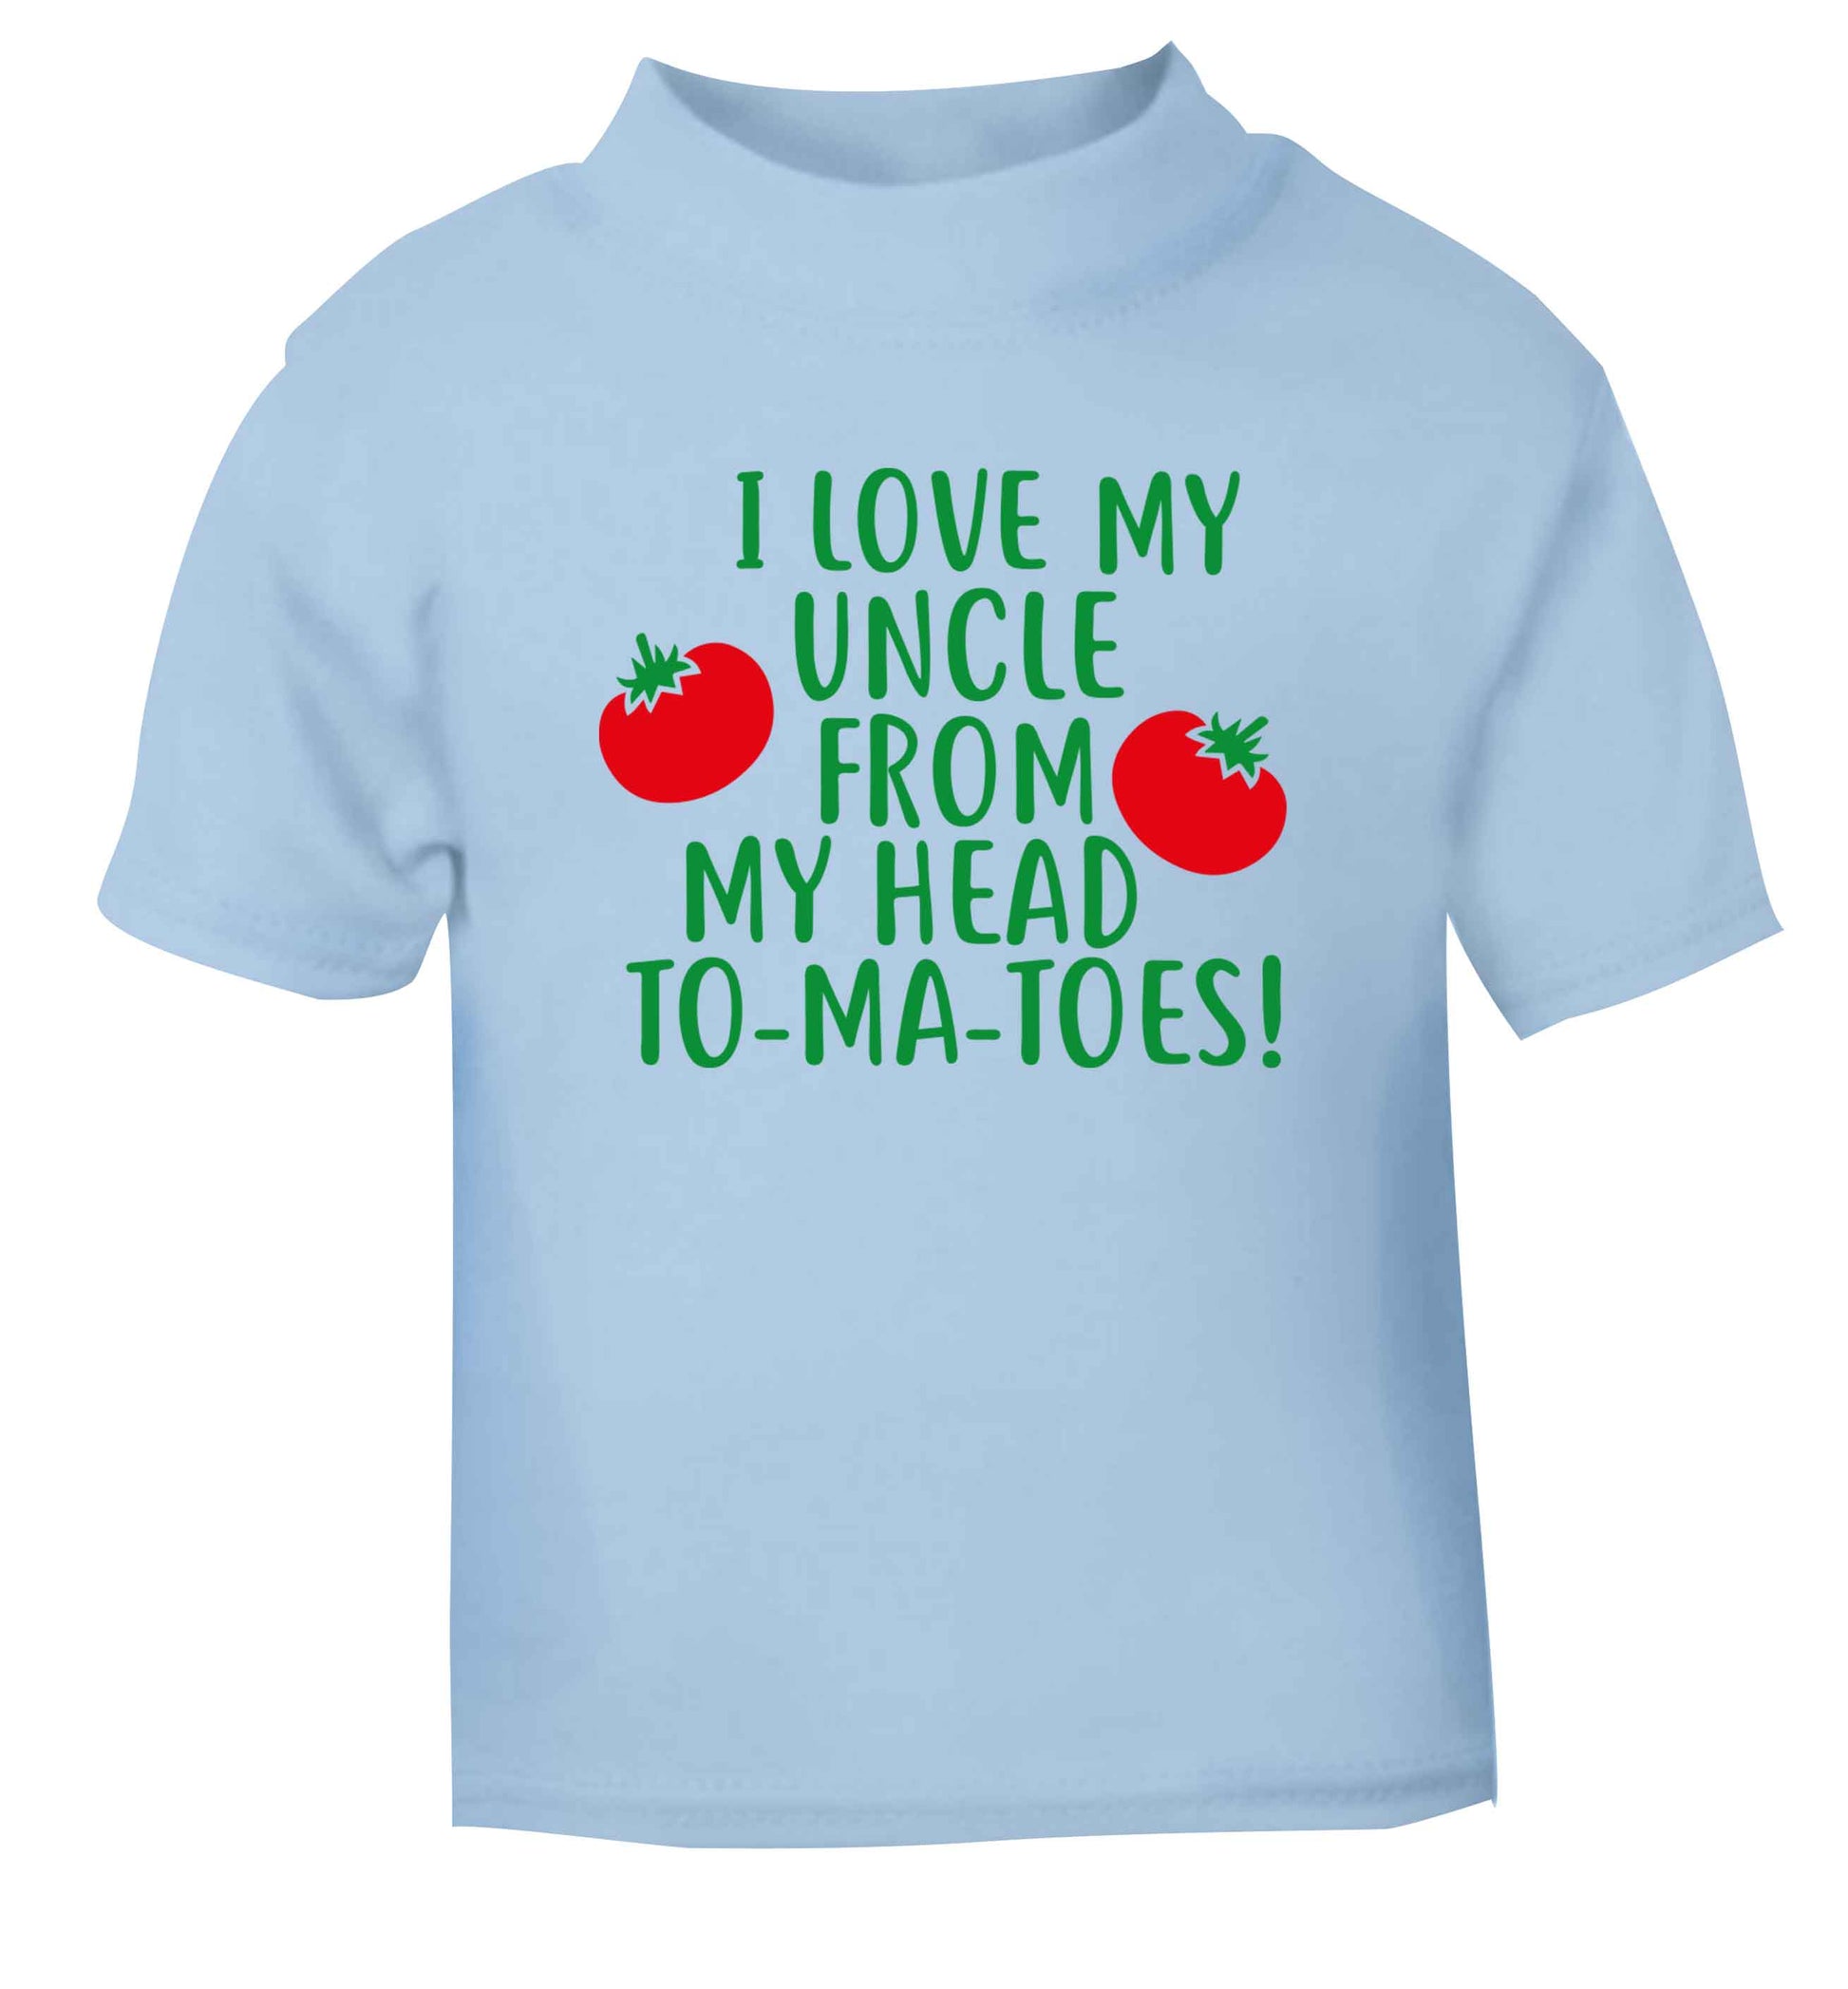 I love my uncle from my head To-Ma-Toes light blue Baby Toddler Tshirt 2 Years